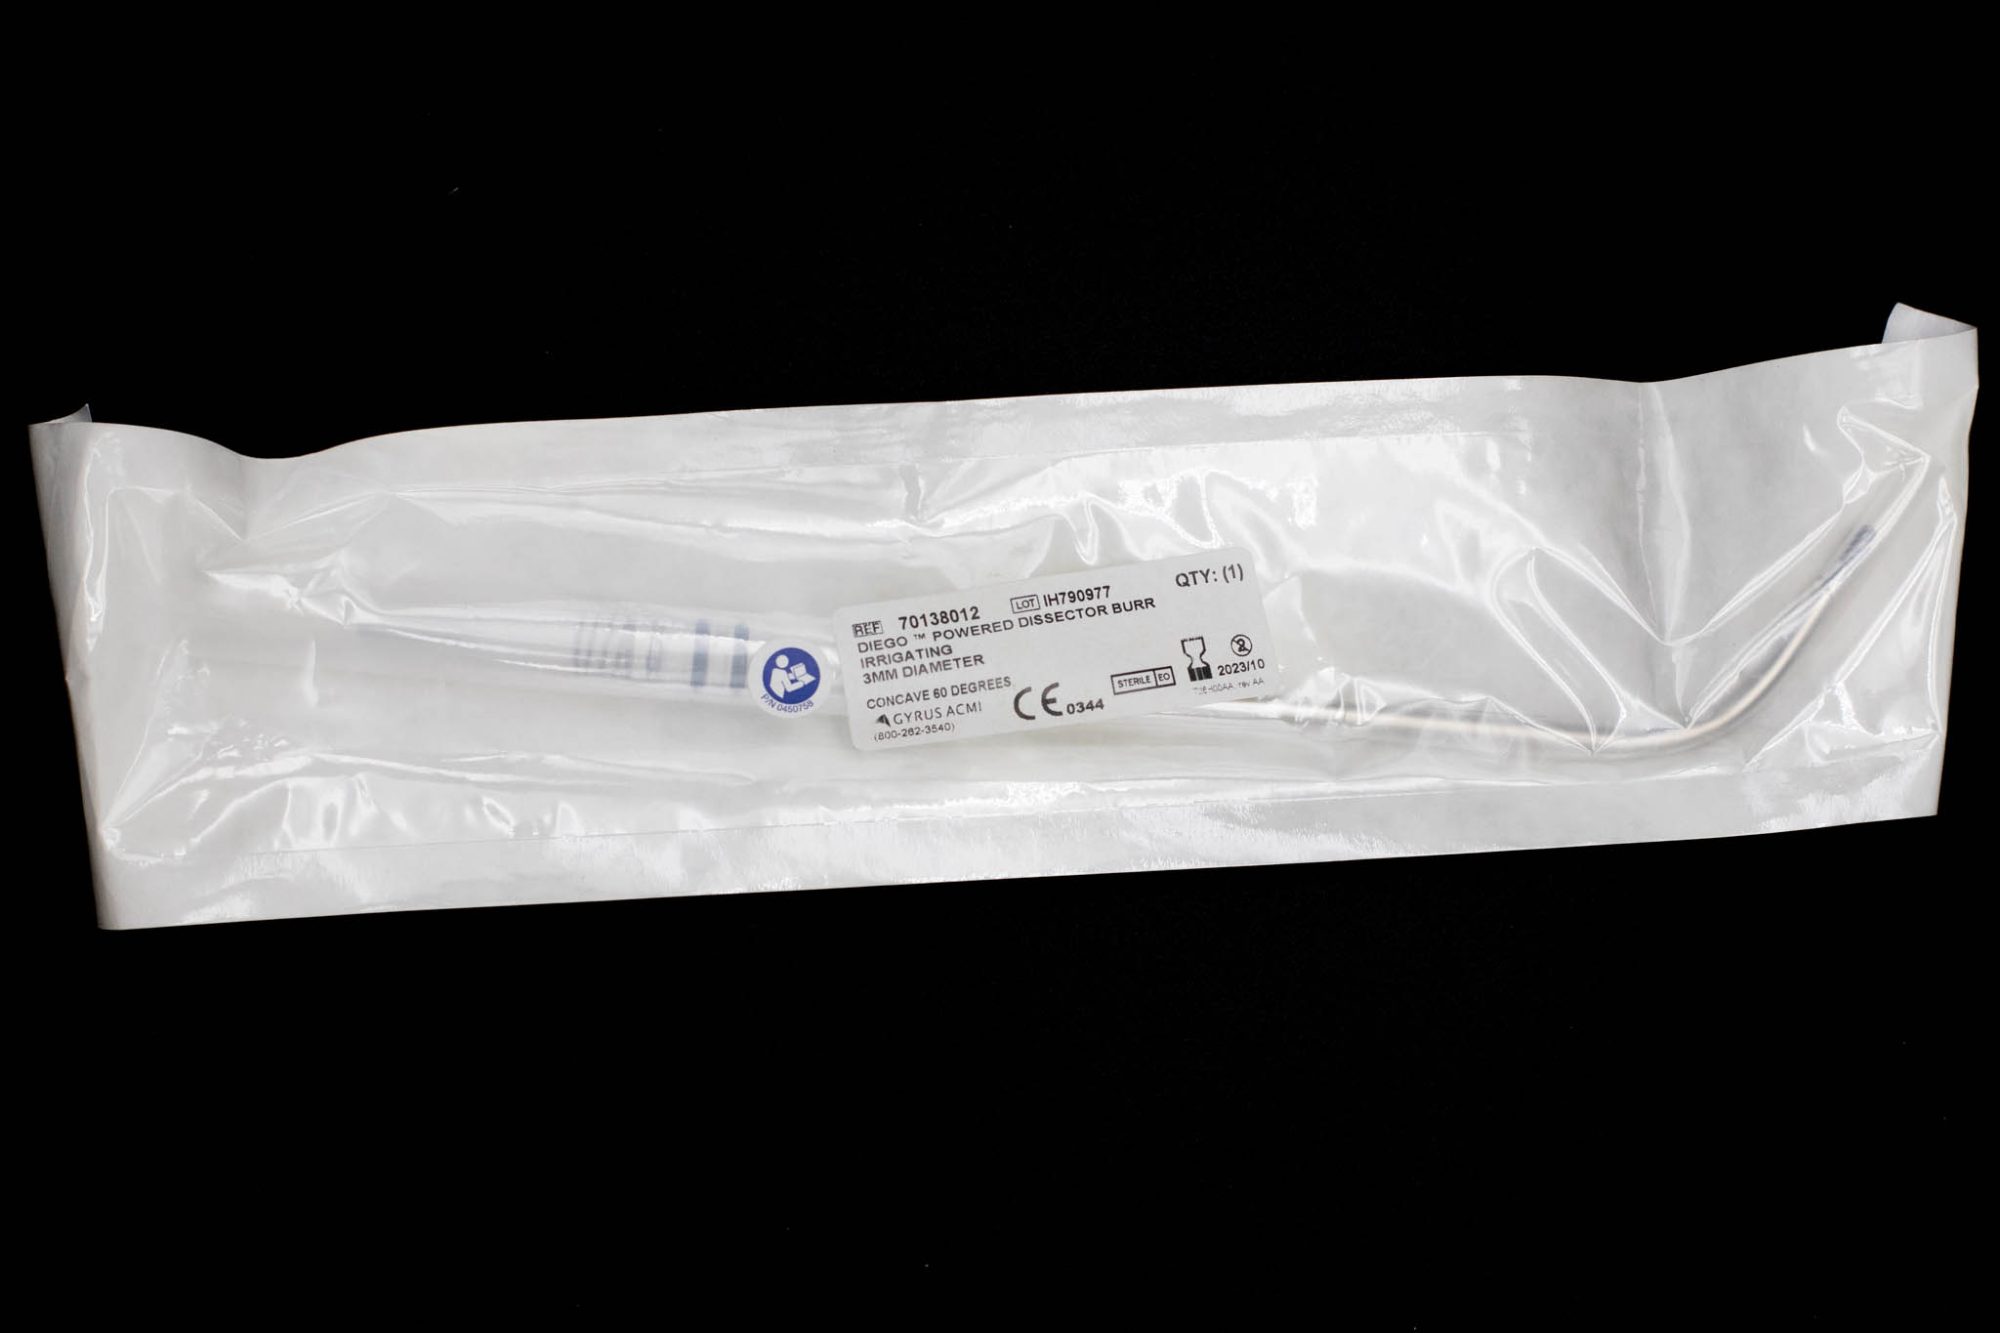 Disposable Diego Powered Dissector Burr, Irrigating, 3mm Dia, Concave 60deg - 70138012 [1/Bag]